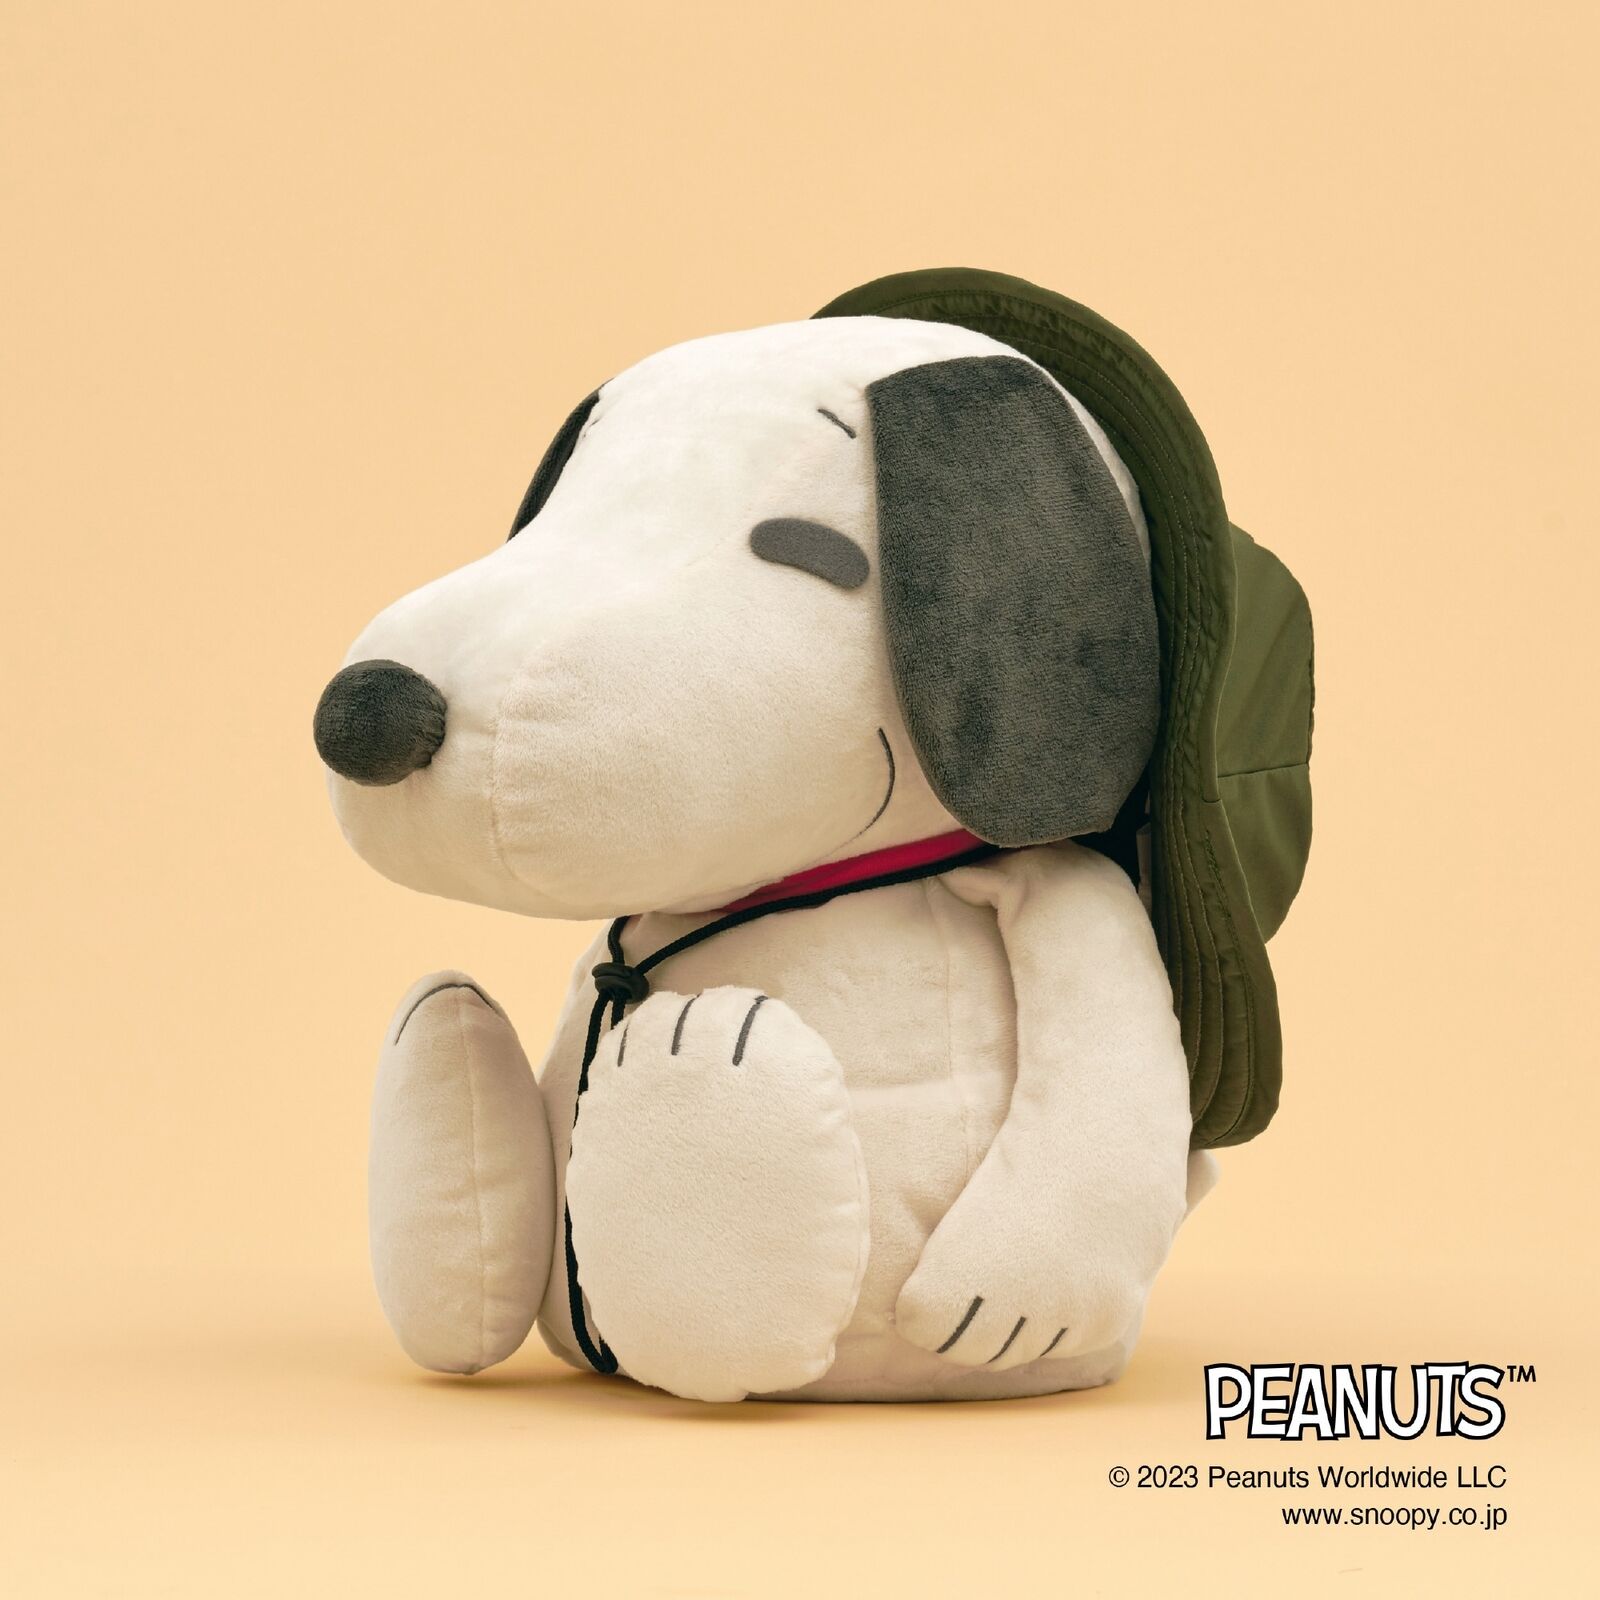 PEANUTS x Mizuno Snoopy Medicine Ball with Hat Stuffed toy that can exercise